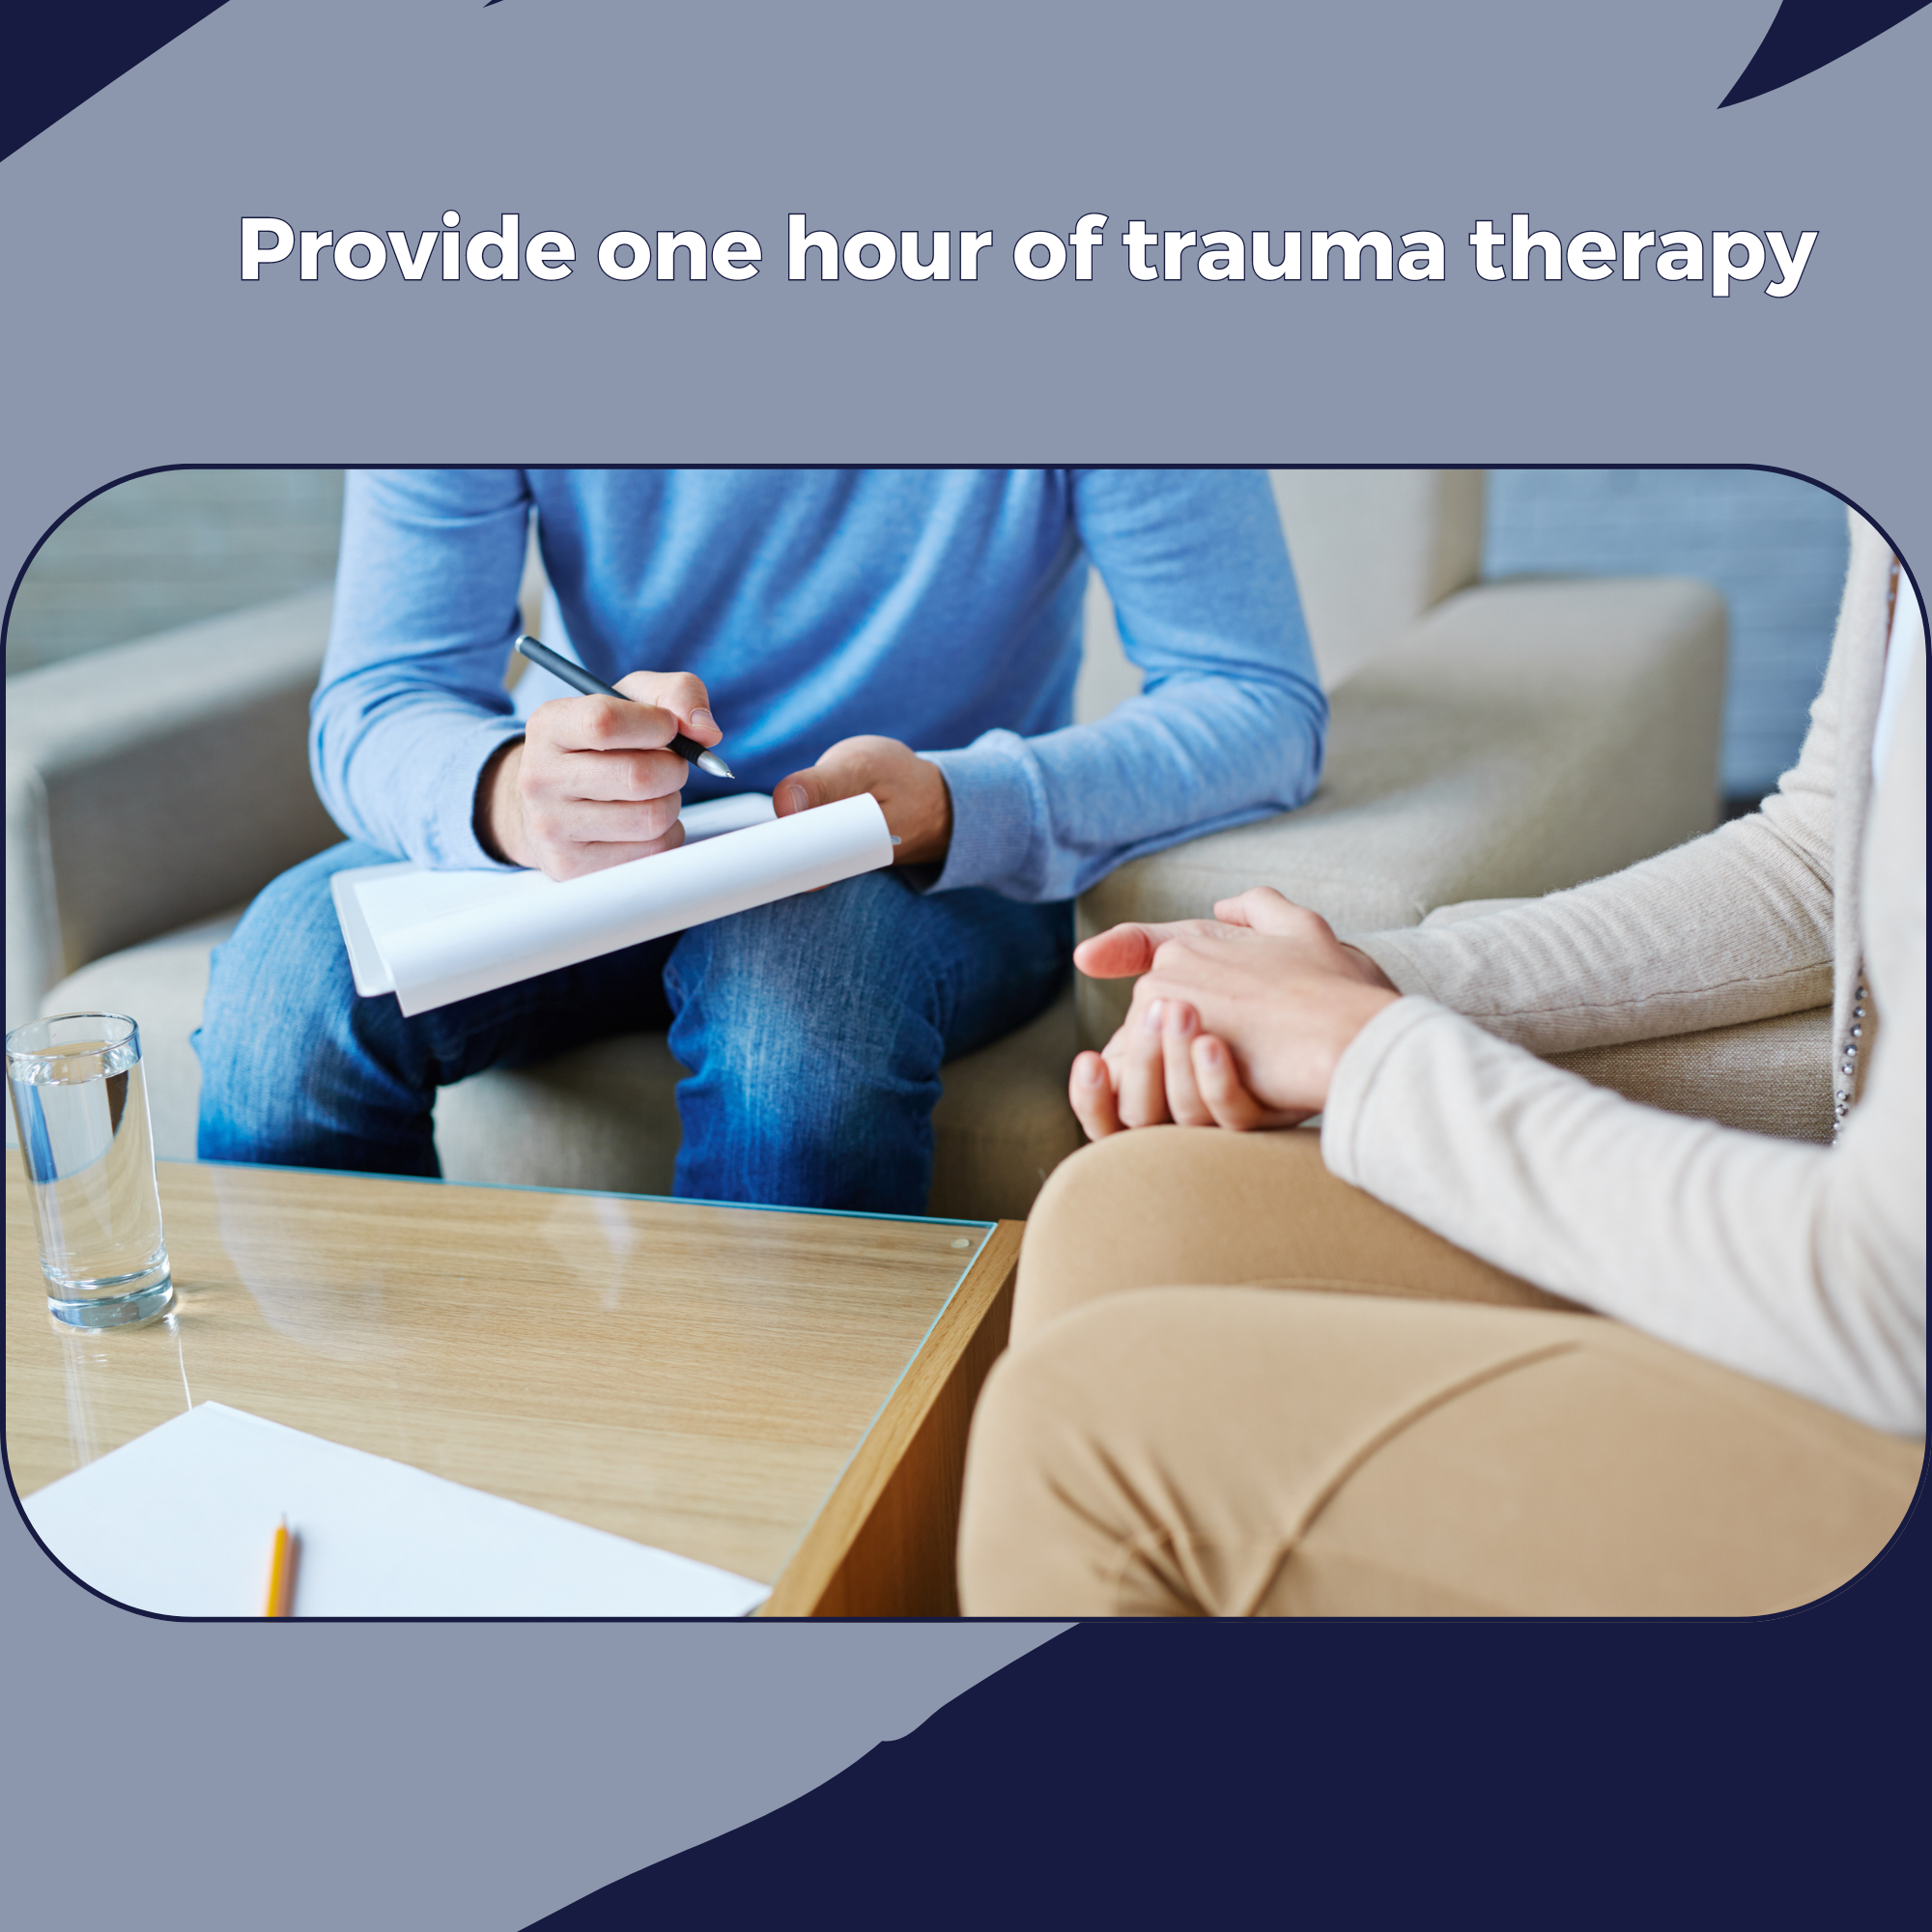 Provide an hour of trauma therapy for a woman in recovery